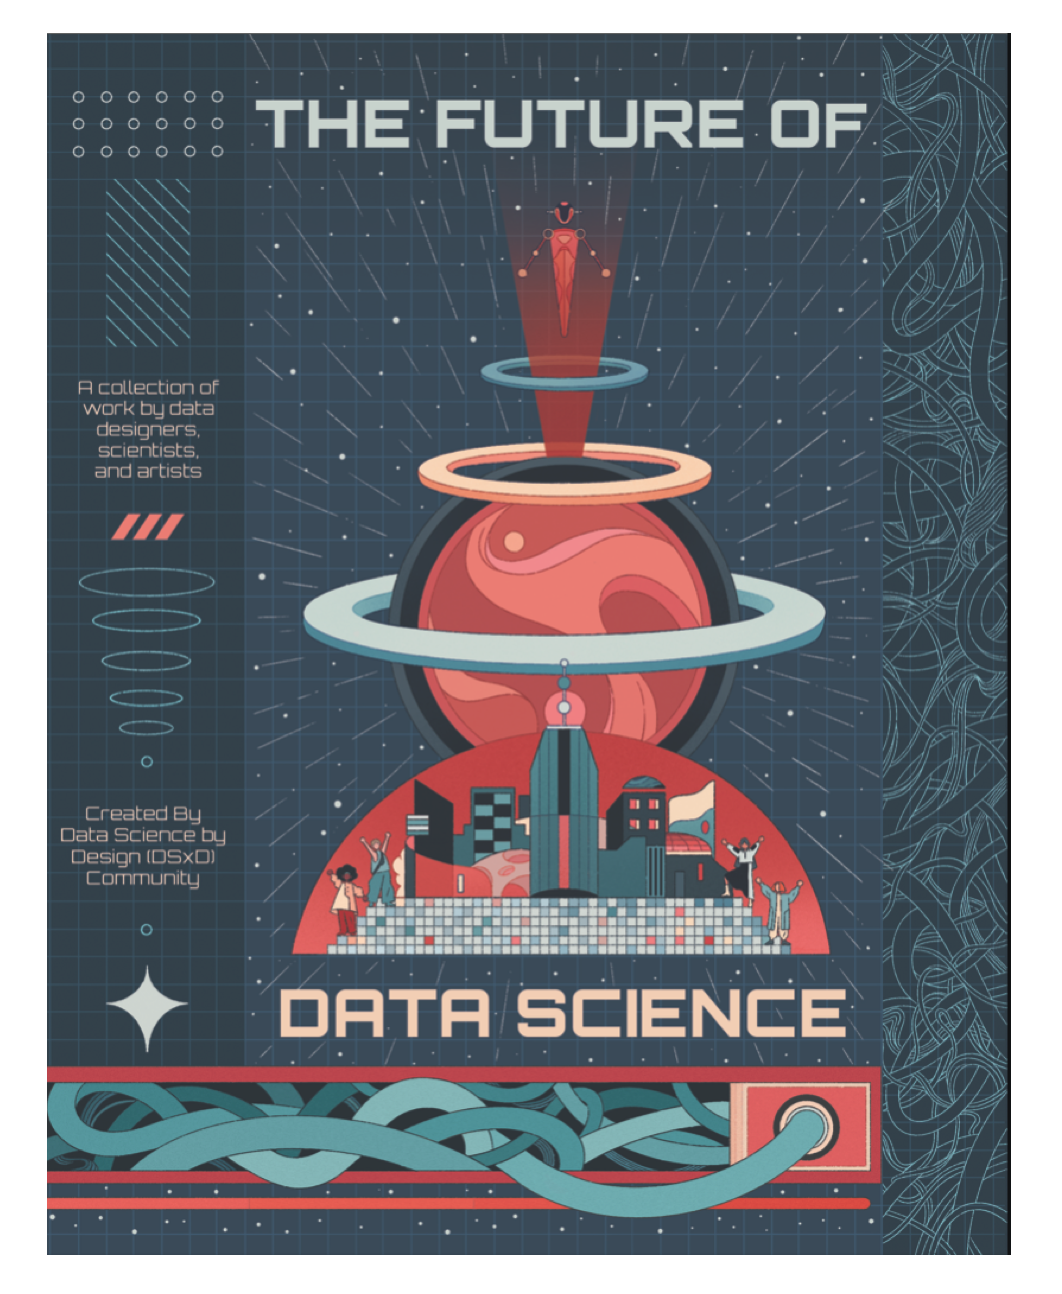 "The Future of Data Science" anthology celebrates the creativity in data science. (Photo/ Data Science by Design)